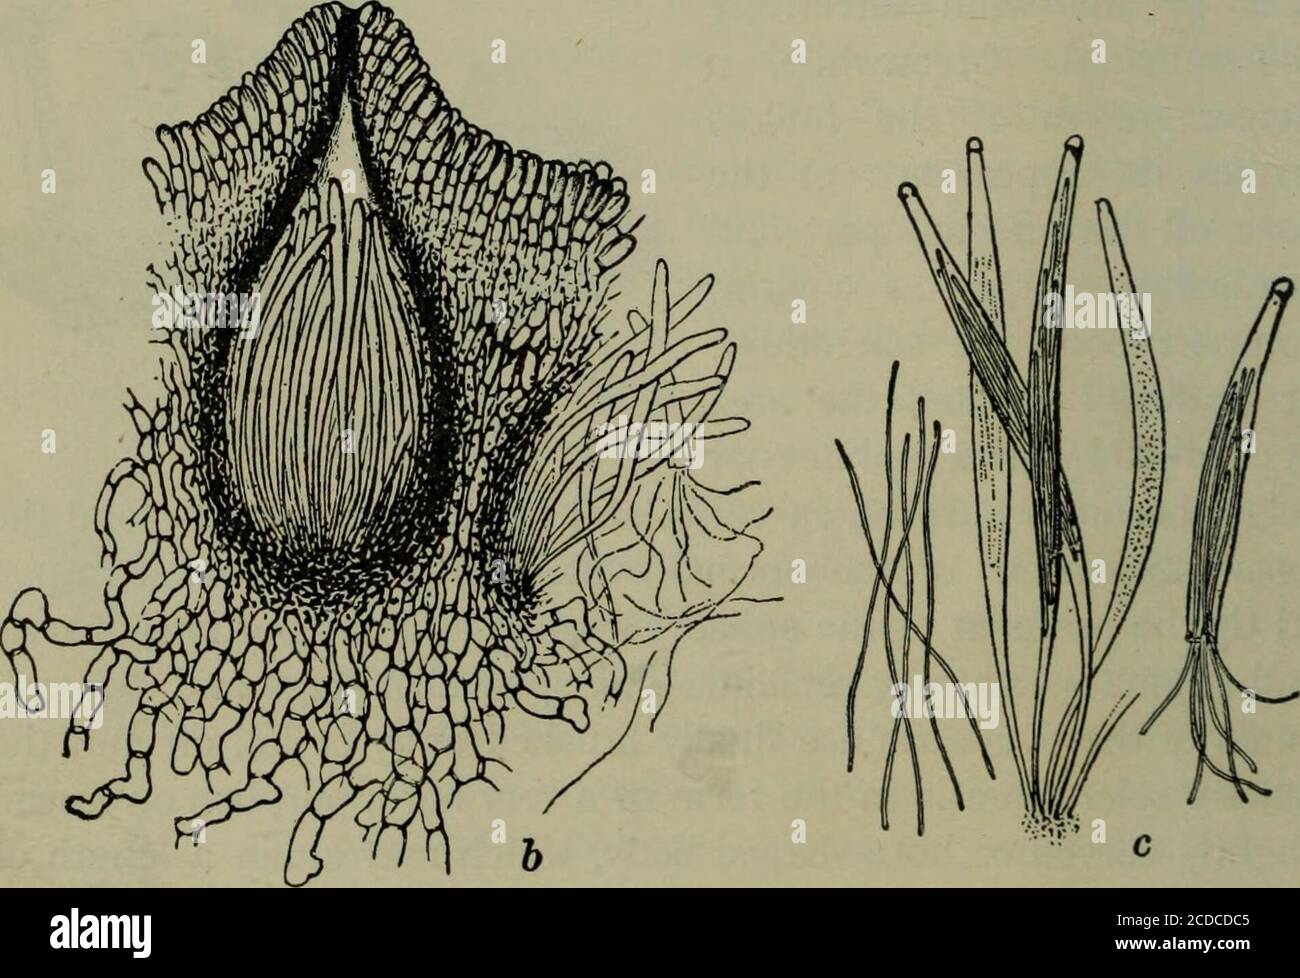 . Fungous diseases of plants, with chapters on physiology, culture methods and technique . Fig. 106. Claviceps purpurea: Section of Stroma and EnlargedPerithecium ; also Asci and Spores. (After Tulasne) the head numerous perithecia are formed near the periphery. Sofar as is known, a perithecium is developed in two successivestages : (i) By the repeated division of a few differentiated cellsbelow the surface there results an ellipsoidal pre-ascal tissue. (2) Inthe proximal or basal portion of this cellular body an hymenium ASCOMYCETES 247 originates, and the asci to which it gives rise obtain r Stock Photo